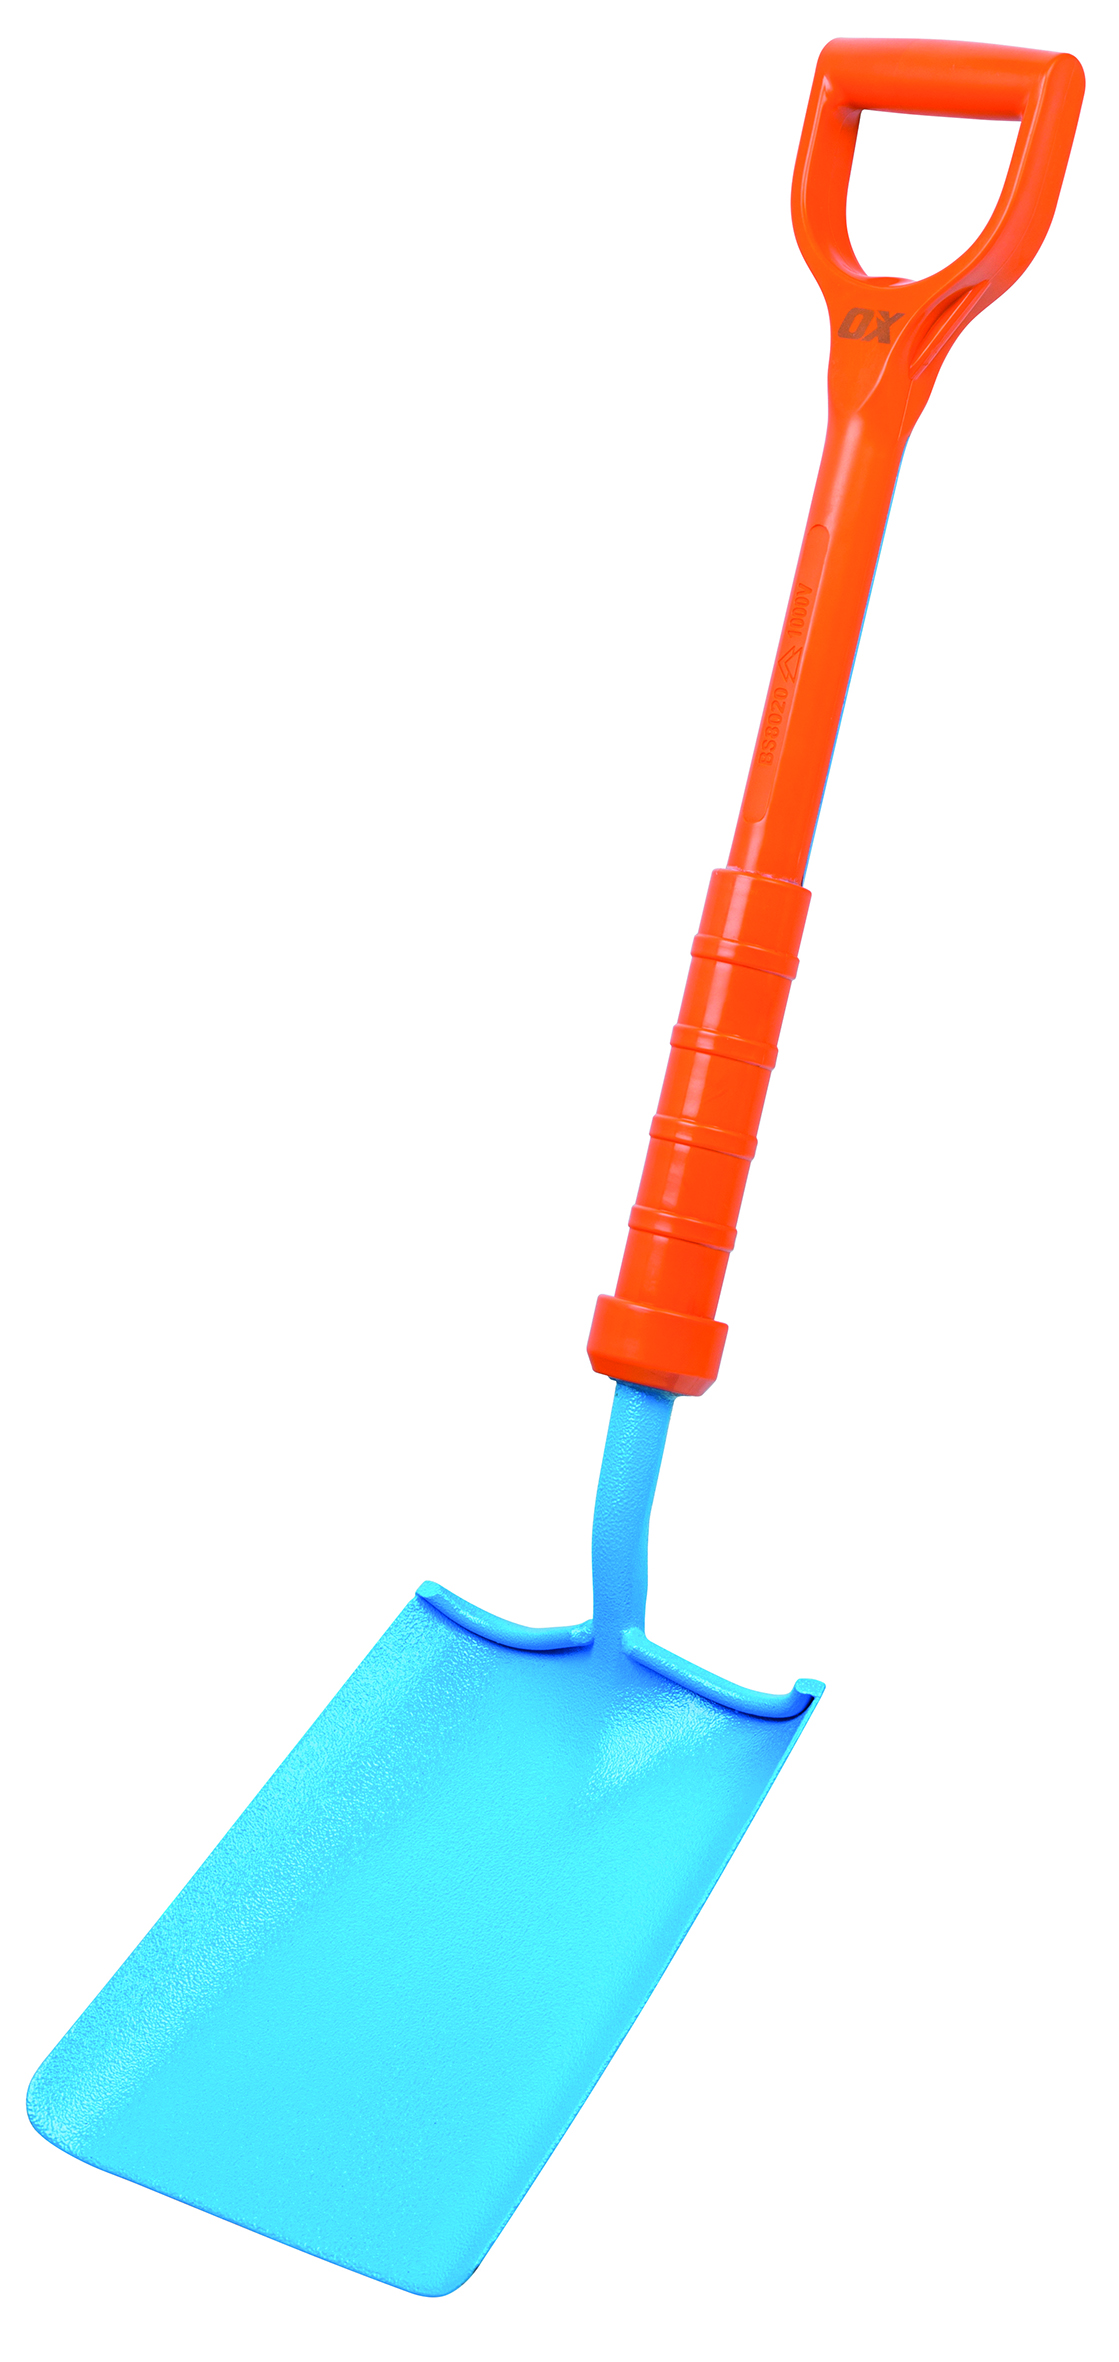 Montravia Ltd OX Pro Insulated Square Mouth Shovel